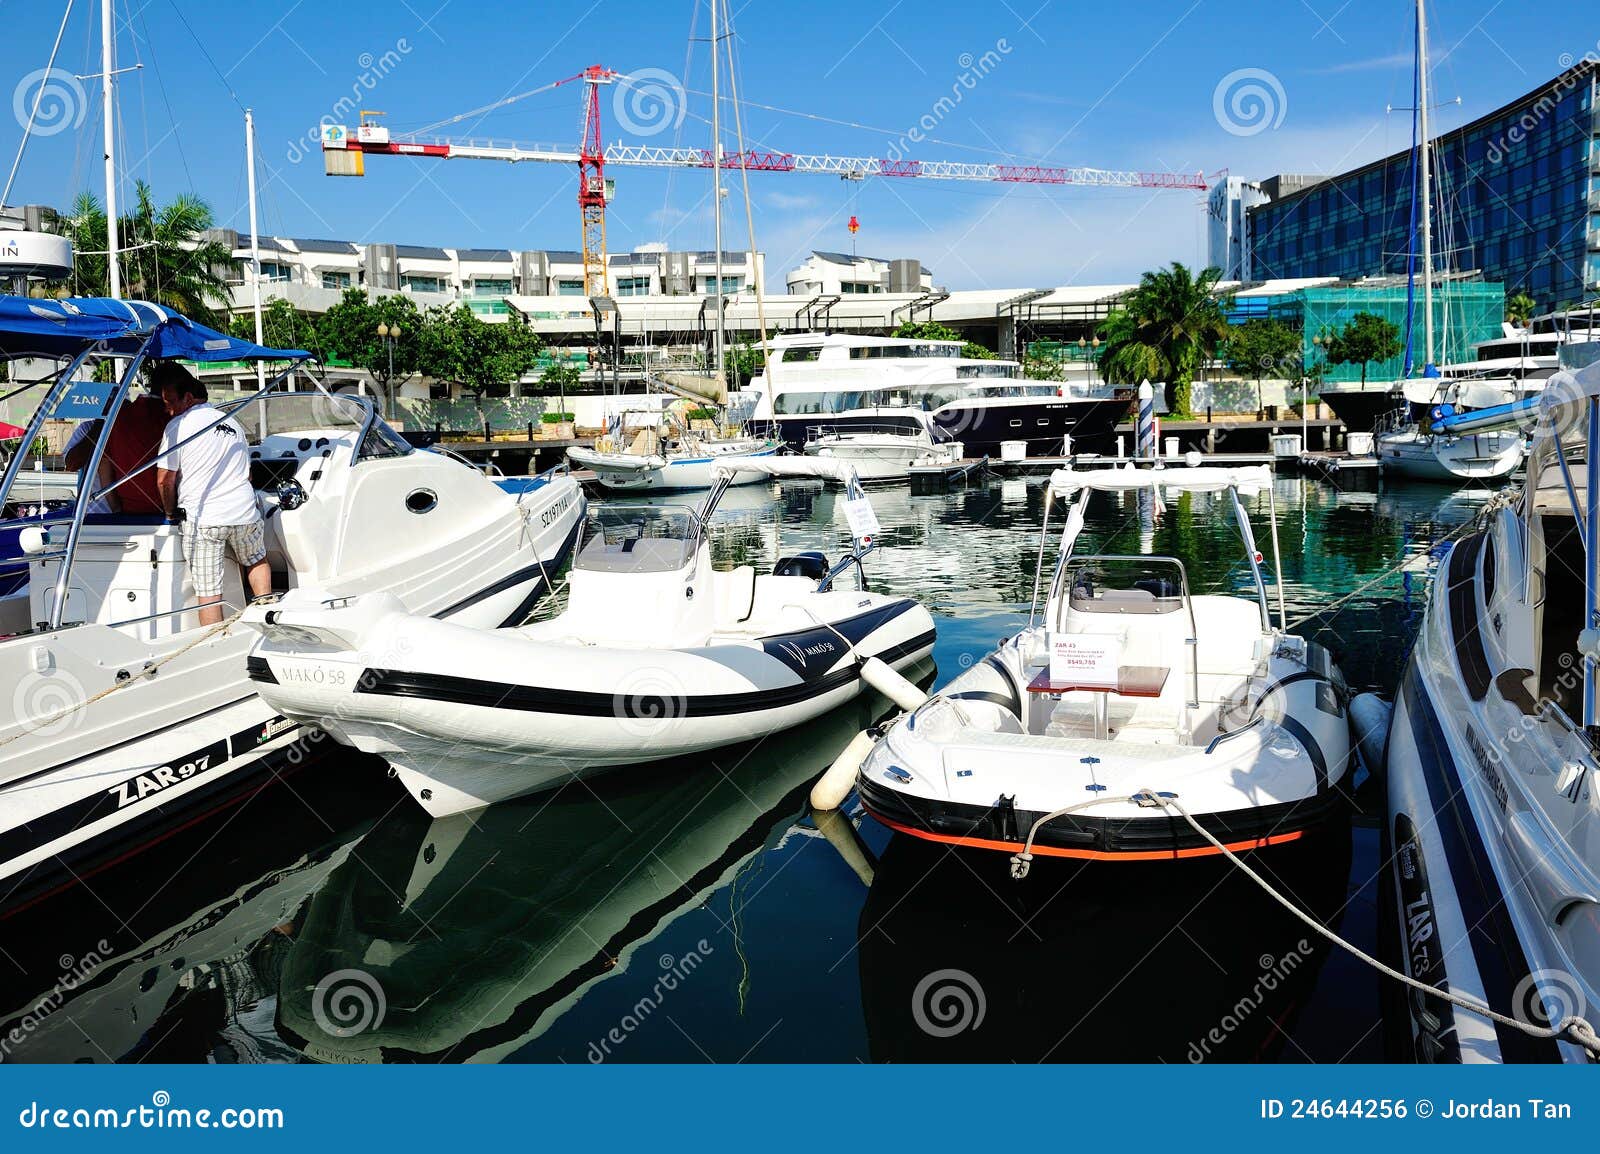 Starting a Boat Rental Company – Sample Business Plan Template